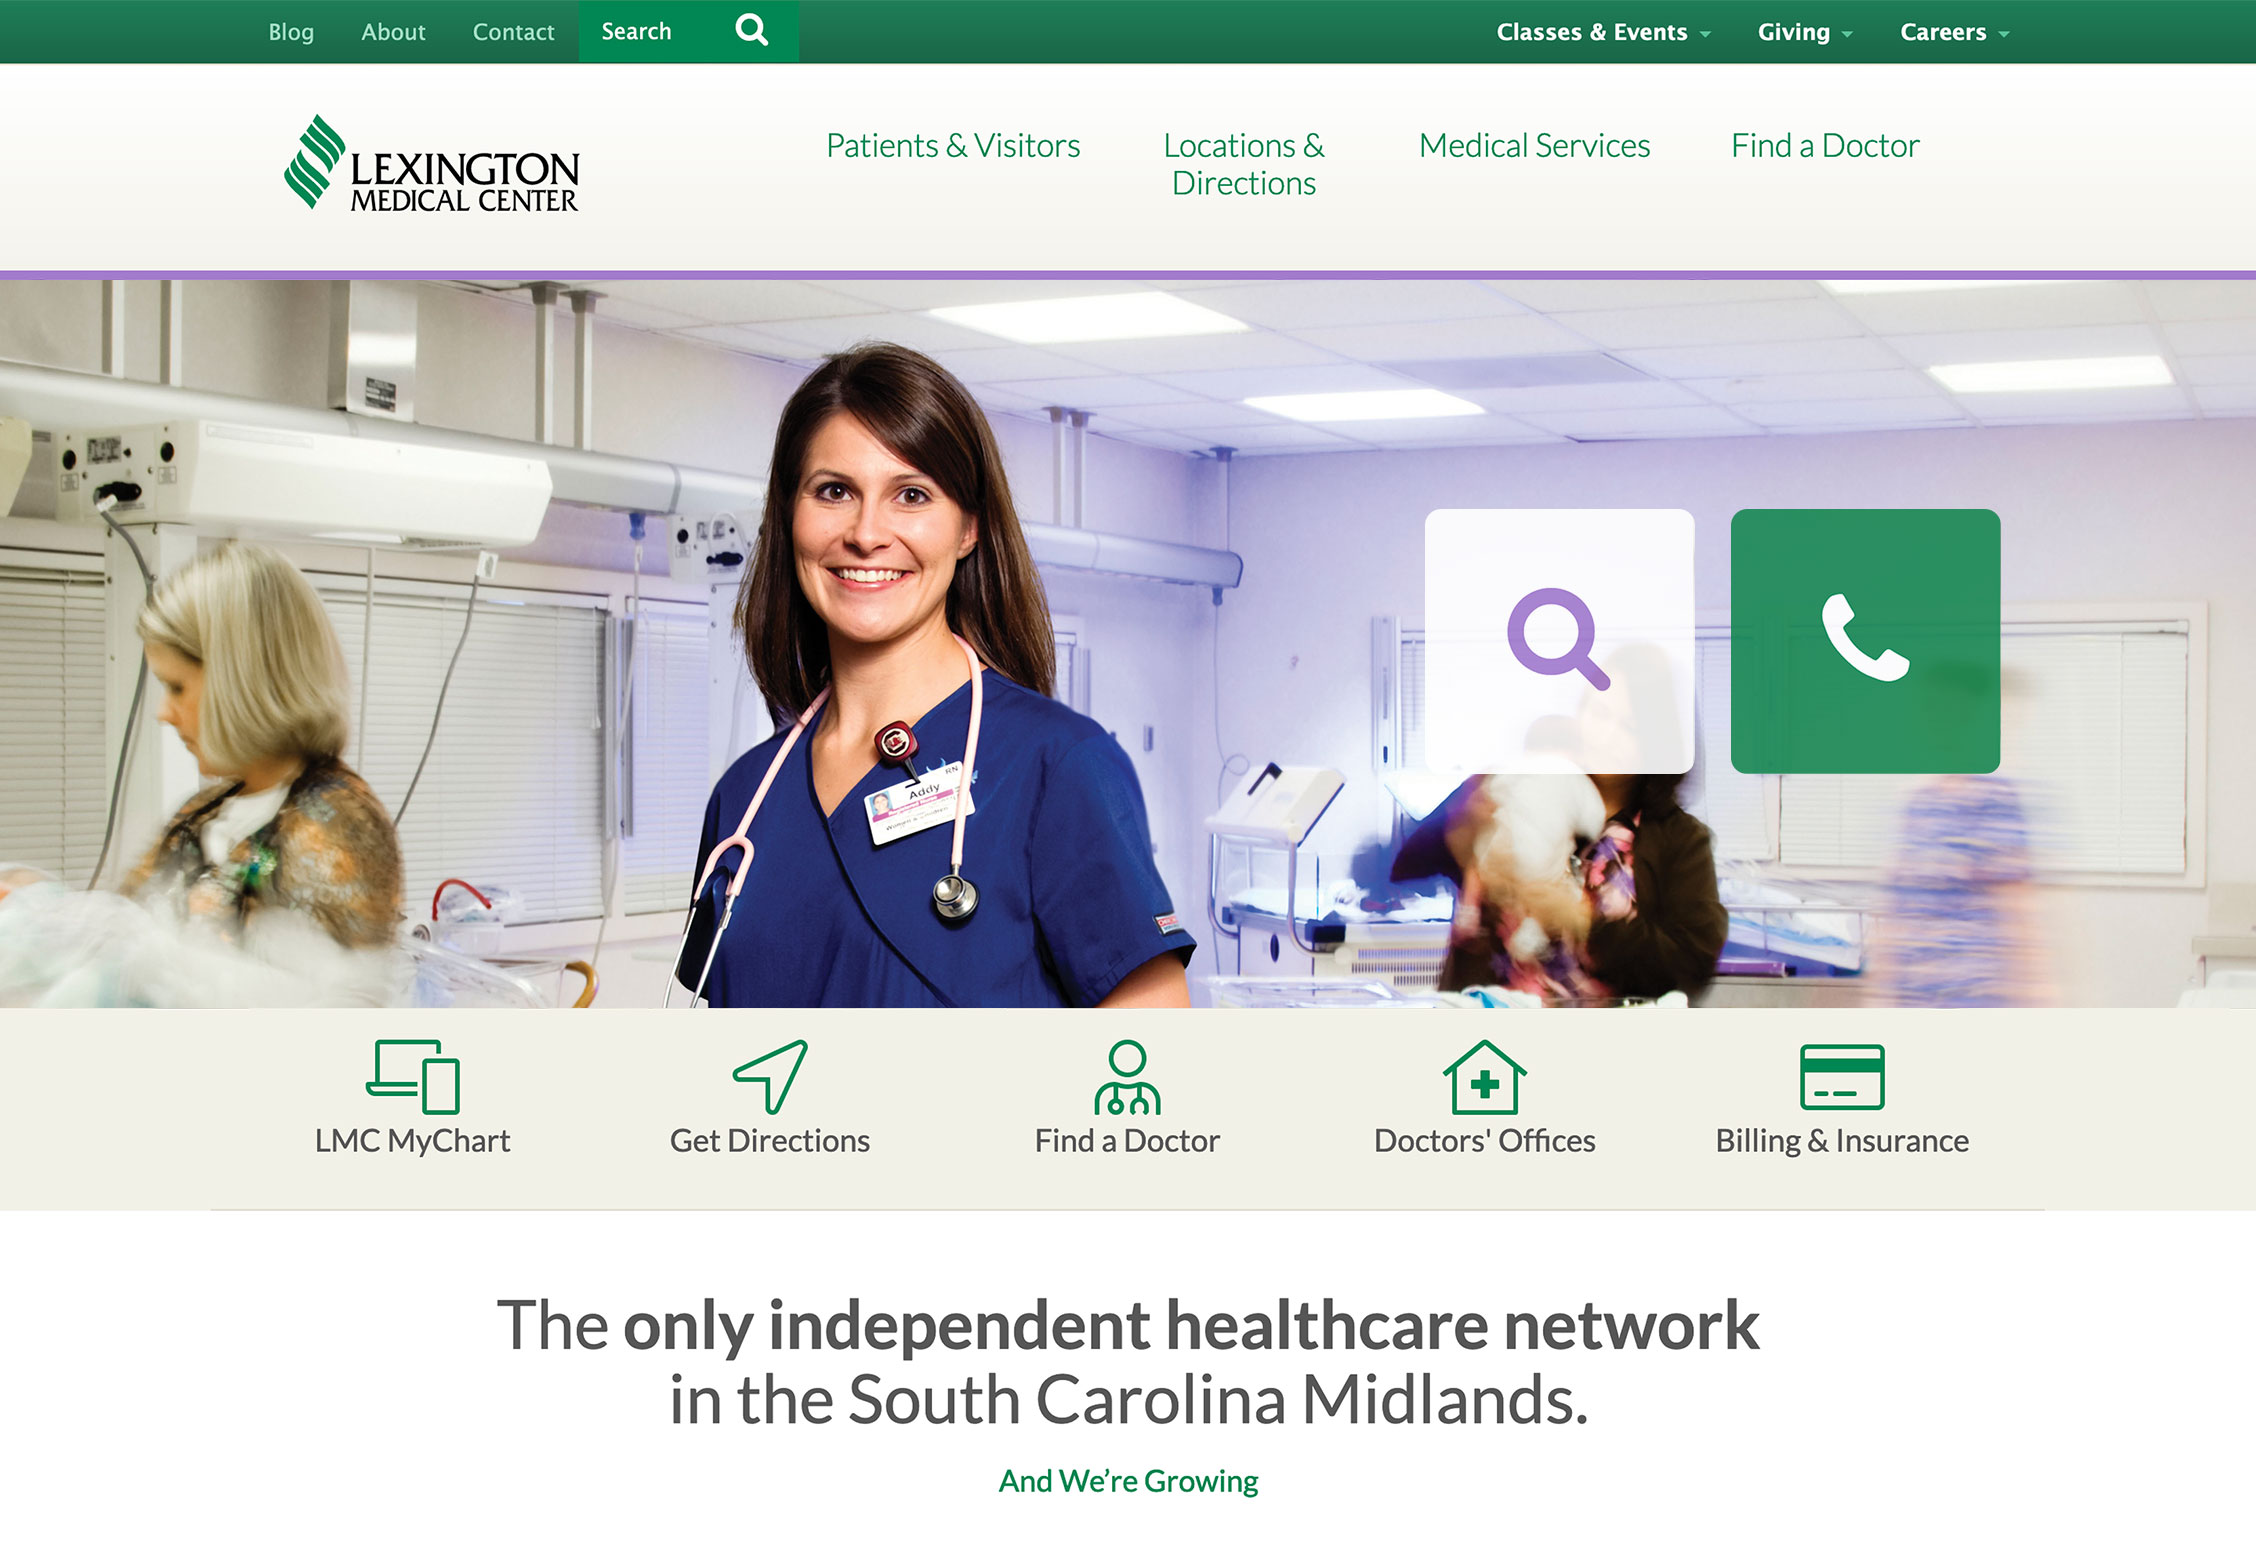 Lexmed.com homepage showing the logo and horizontal navigation links above a hero image of a doctor and icons for search and call, then a row of quick links, and a large, full-width statement: The only independent healthcare network in the South Carolina Midlands.